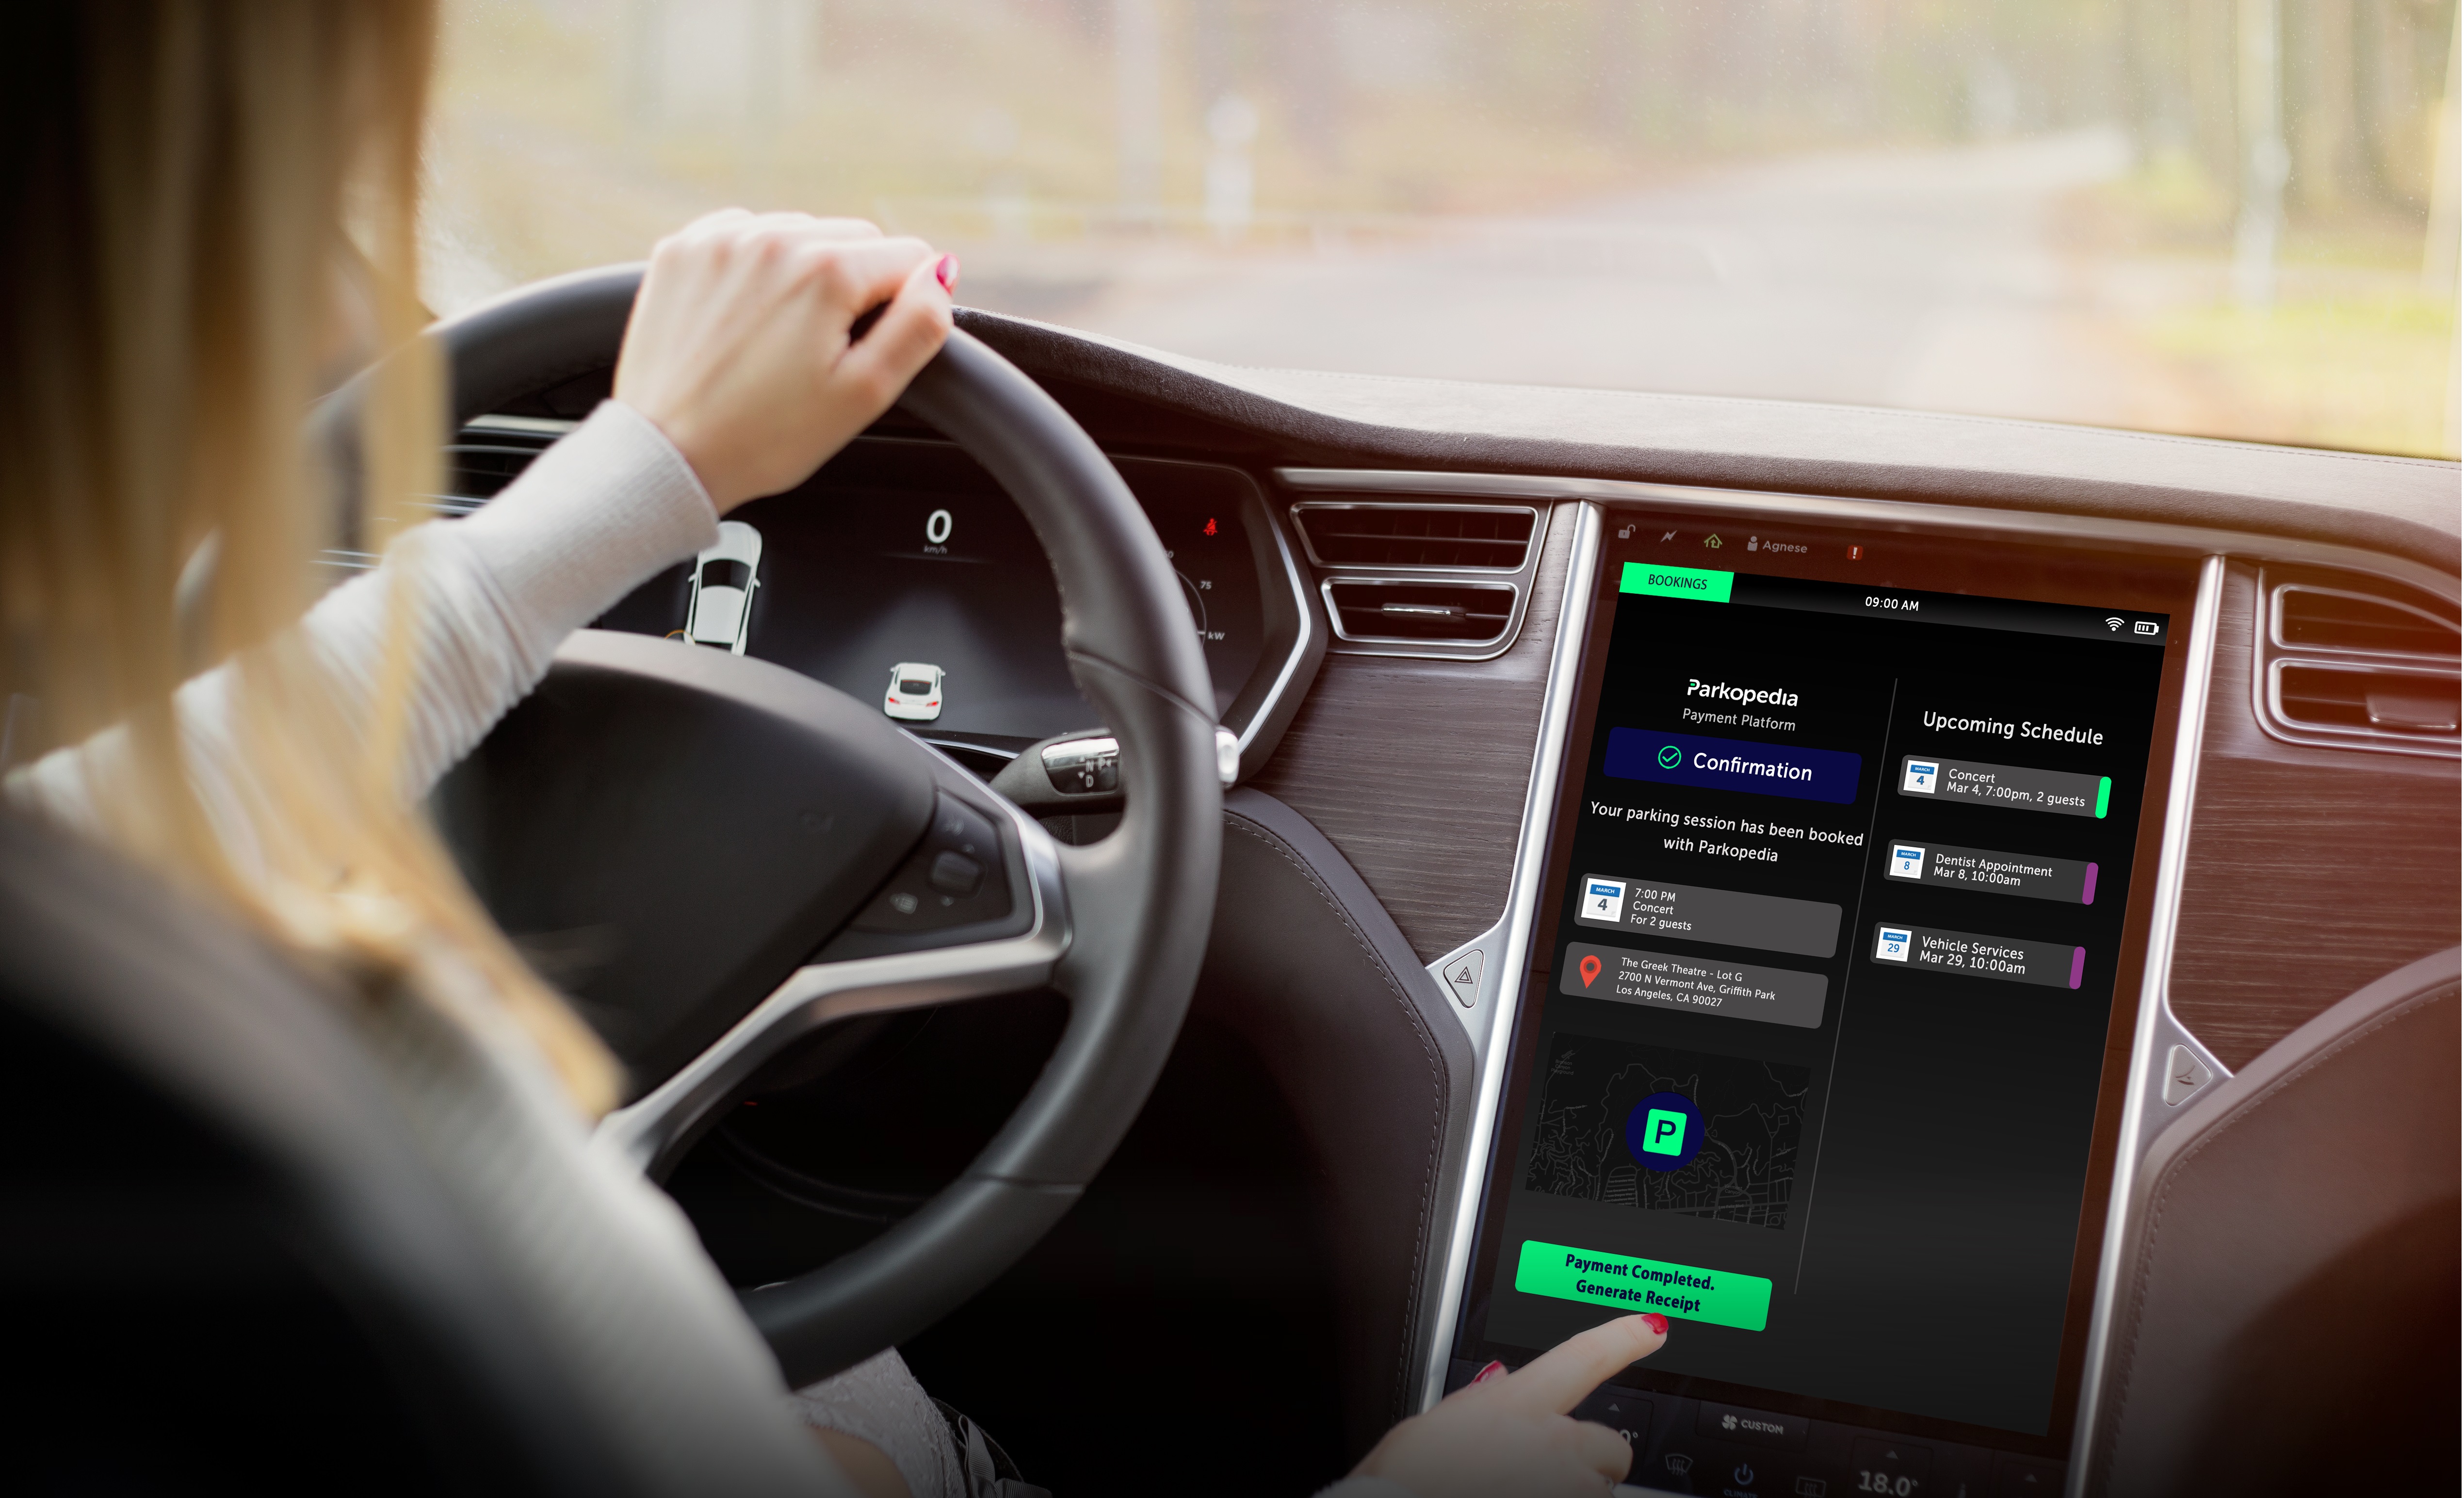 This simplifies the process of adding connected services to vehicles for auto manufacturers - offering drivers additional value through innovative connected features.